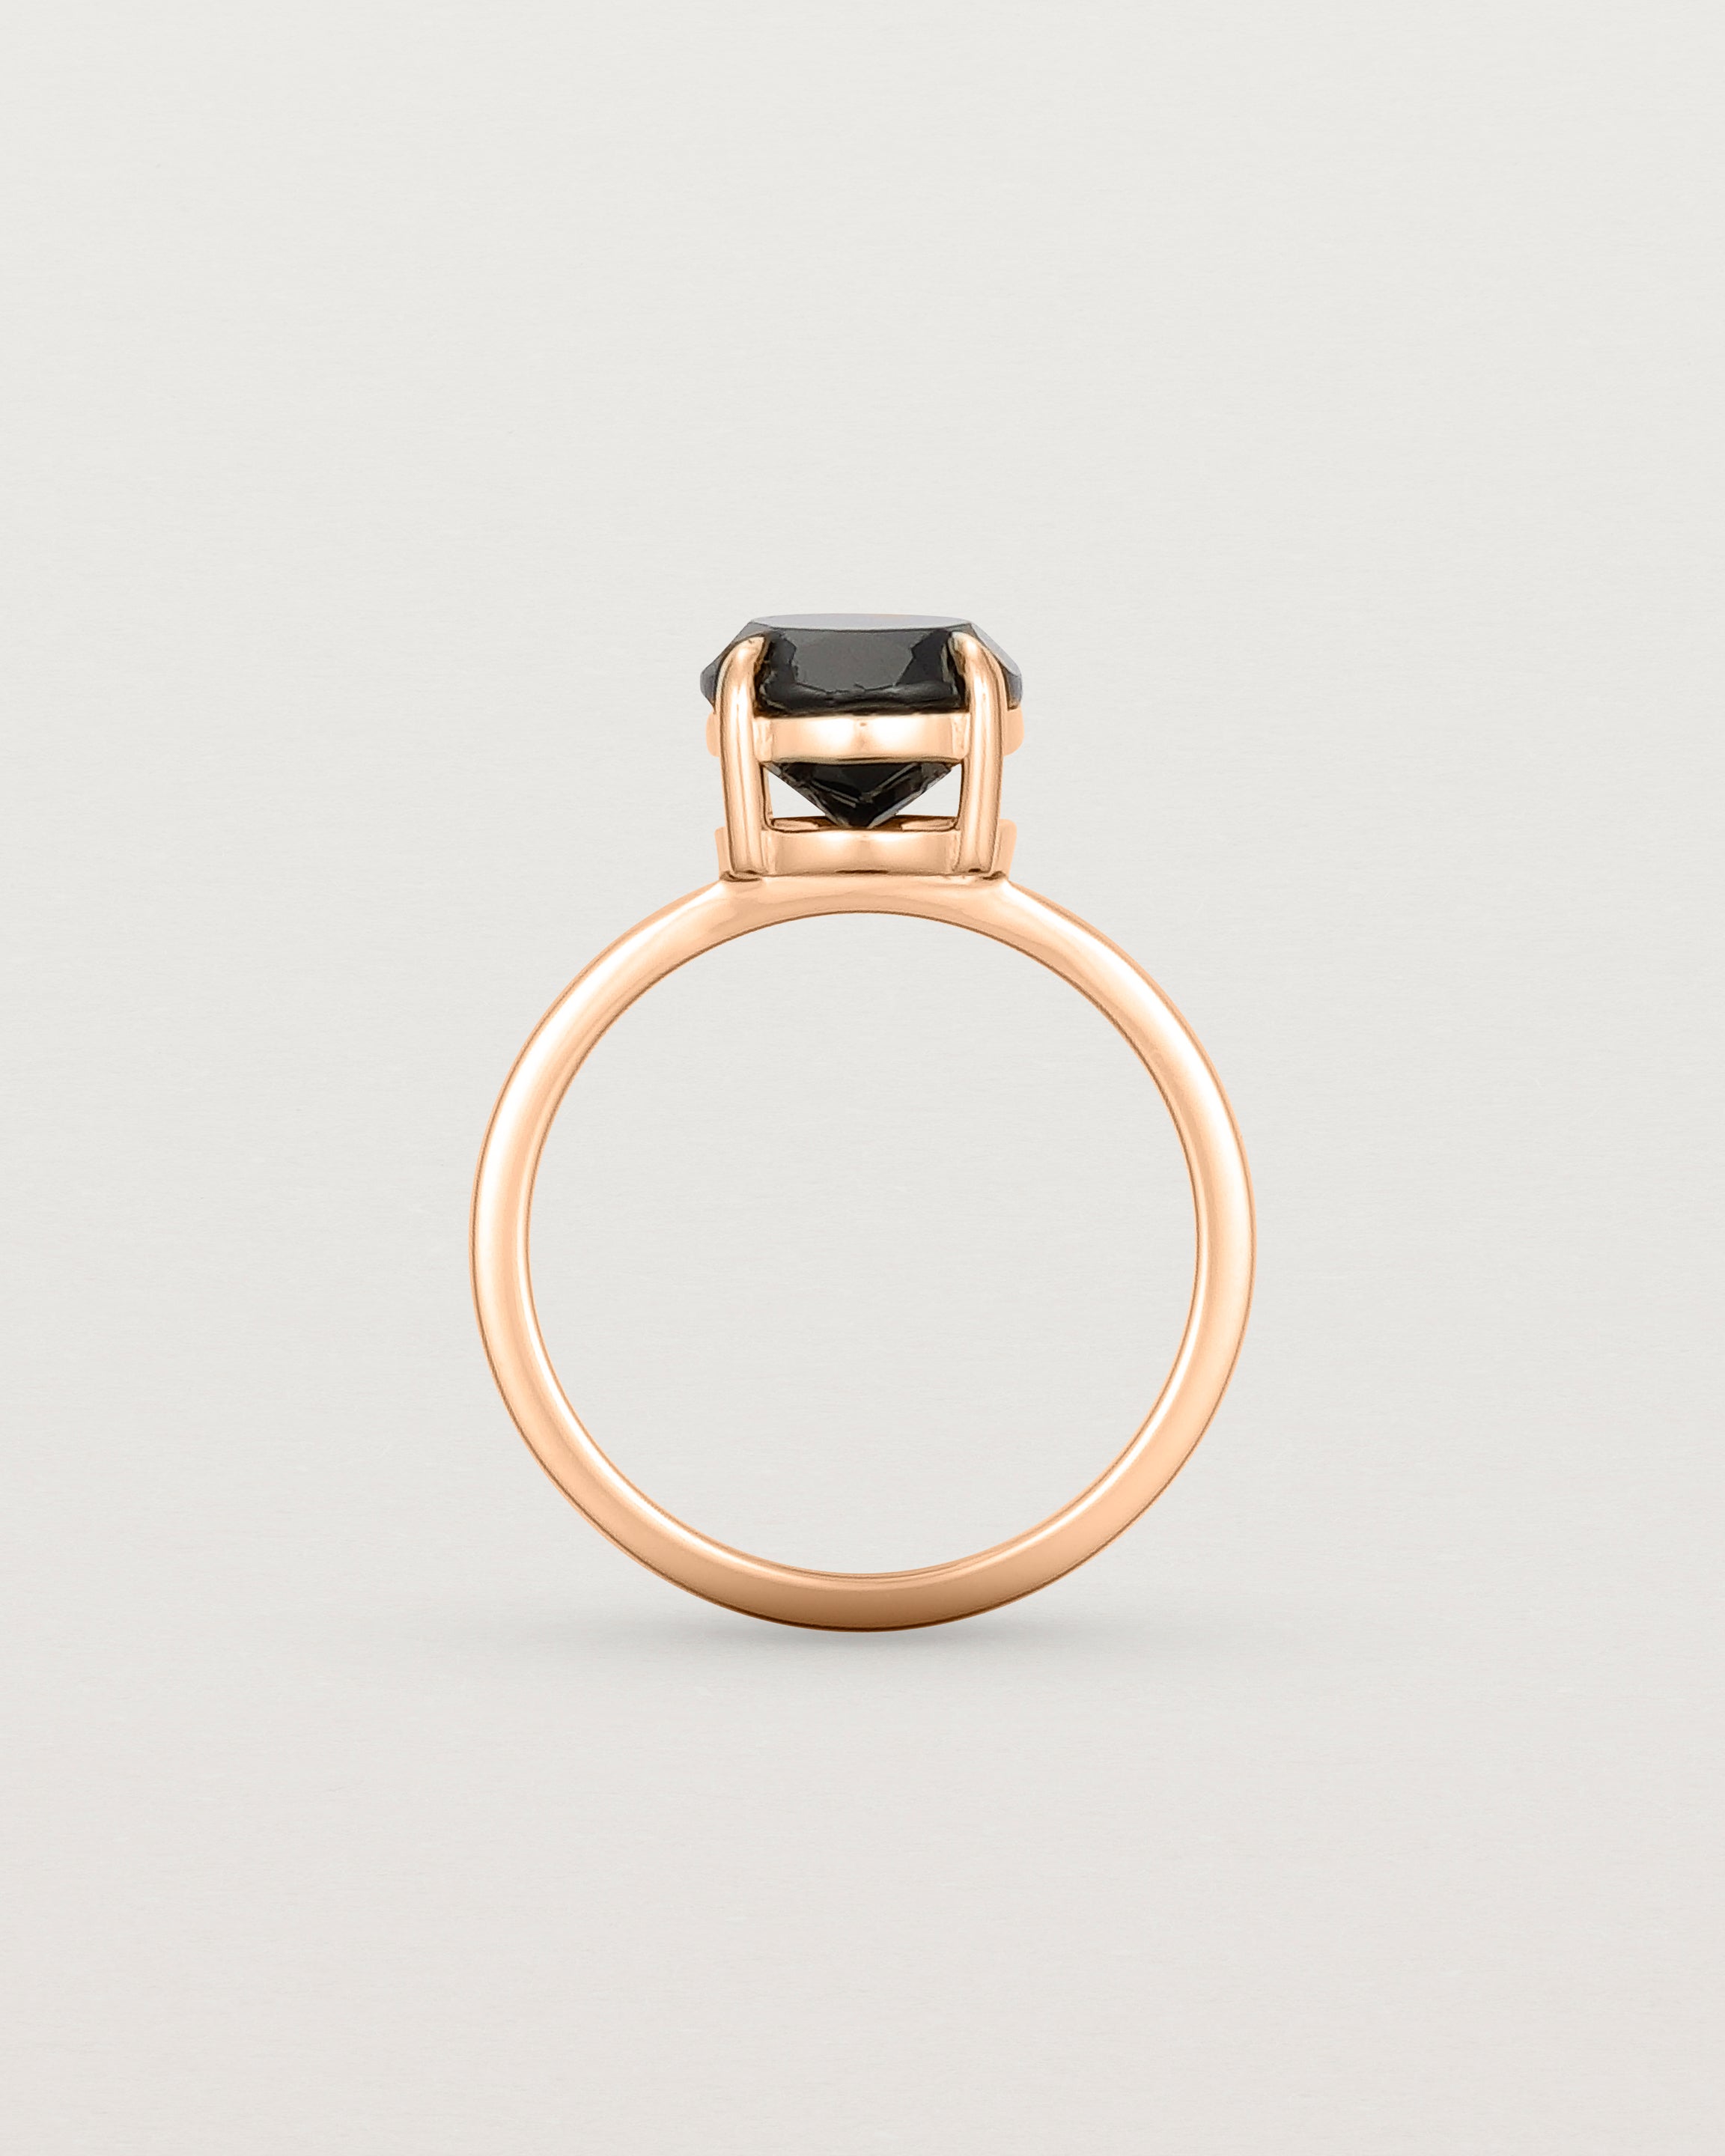 Standing view of the Una Round Solitaire | Black Spinel | Rose Gold